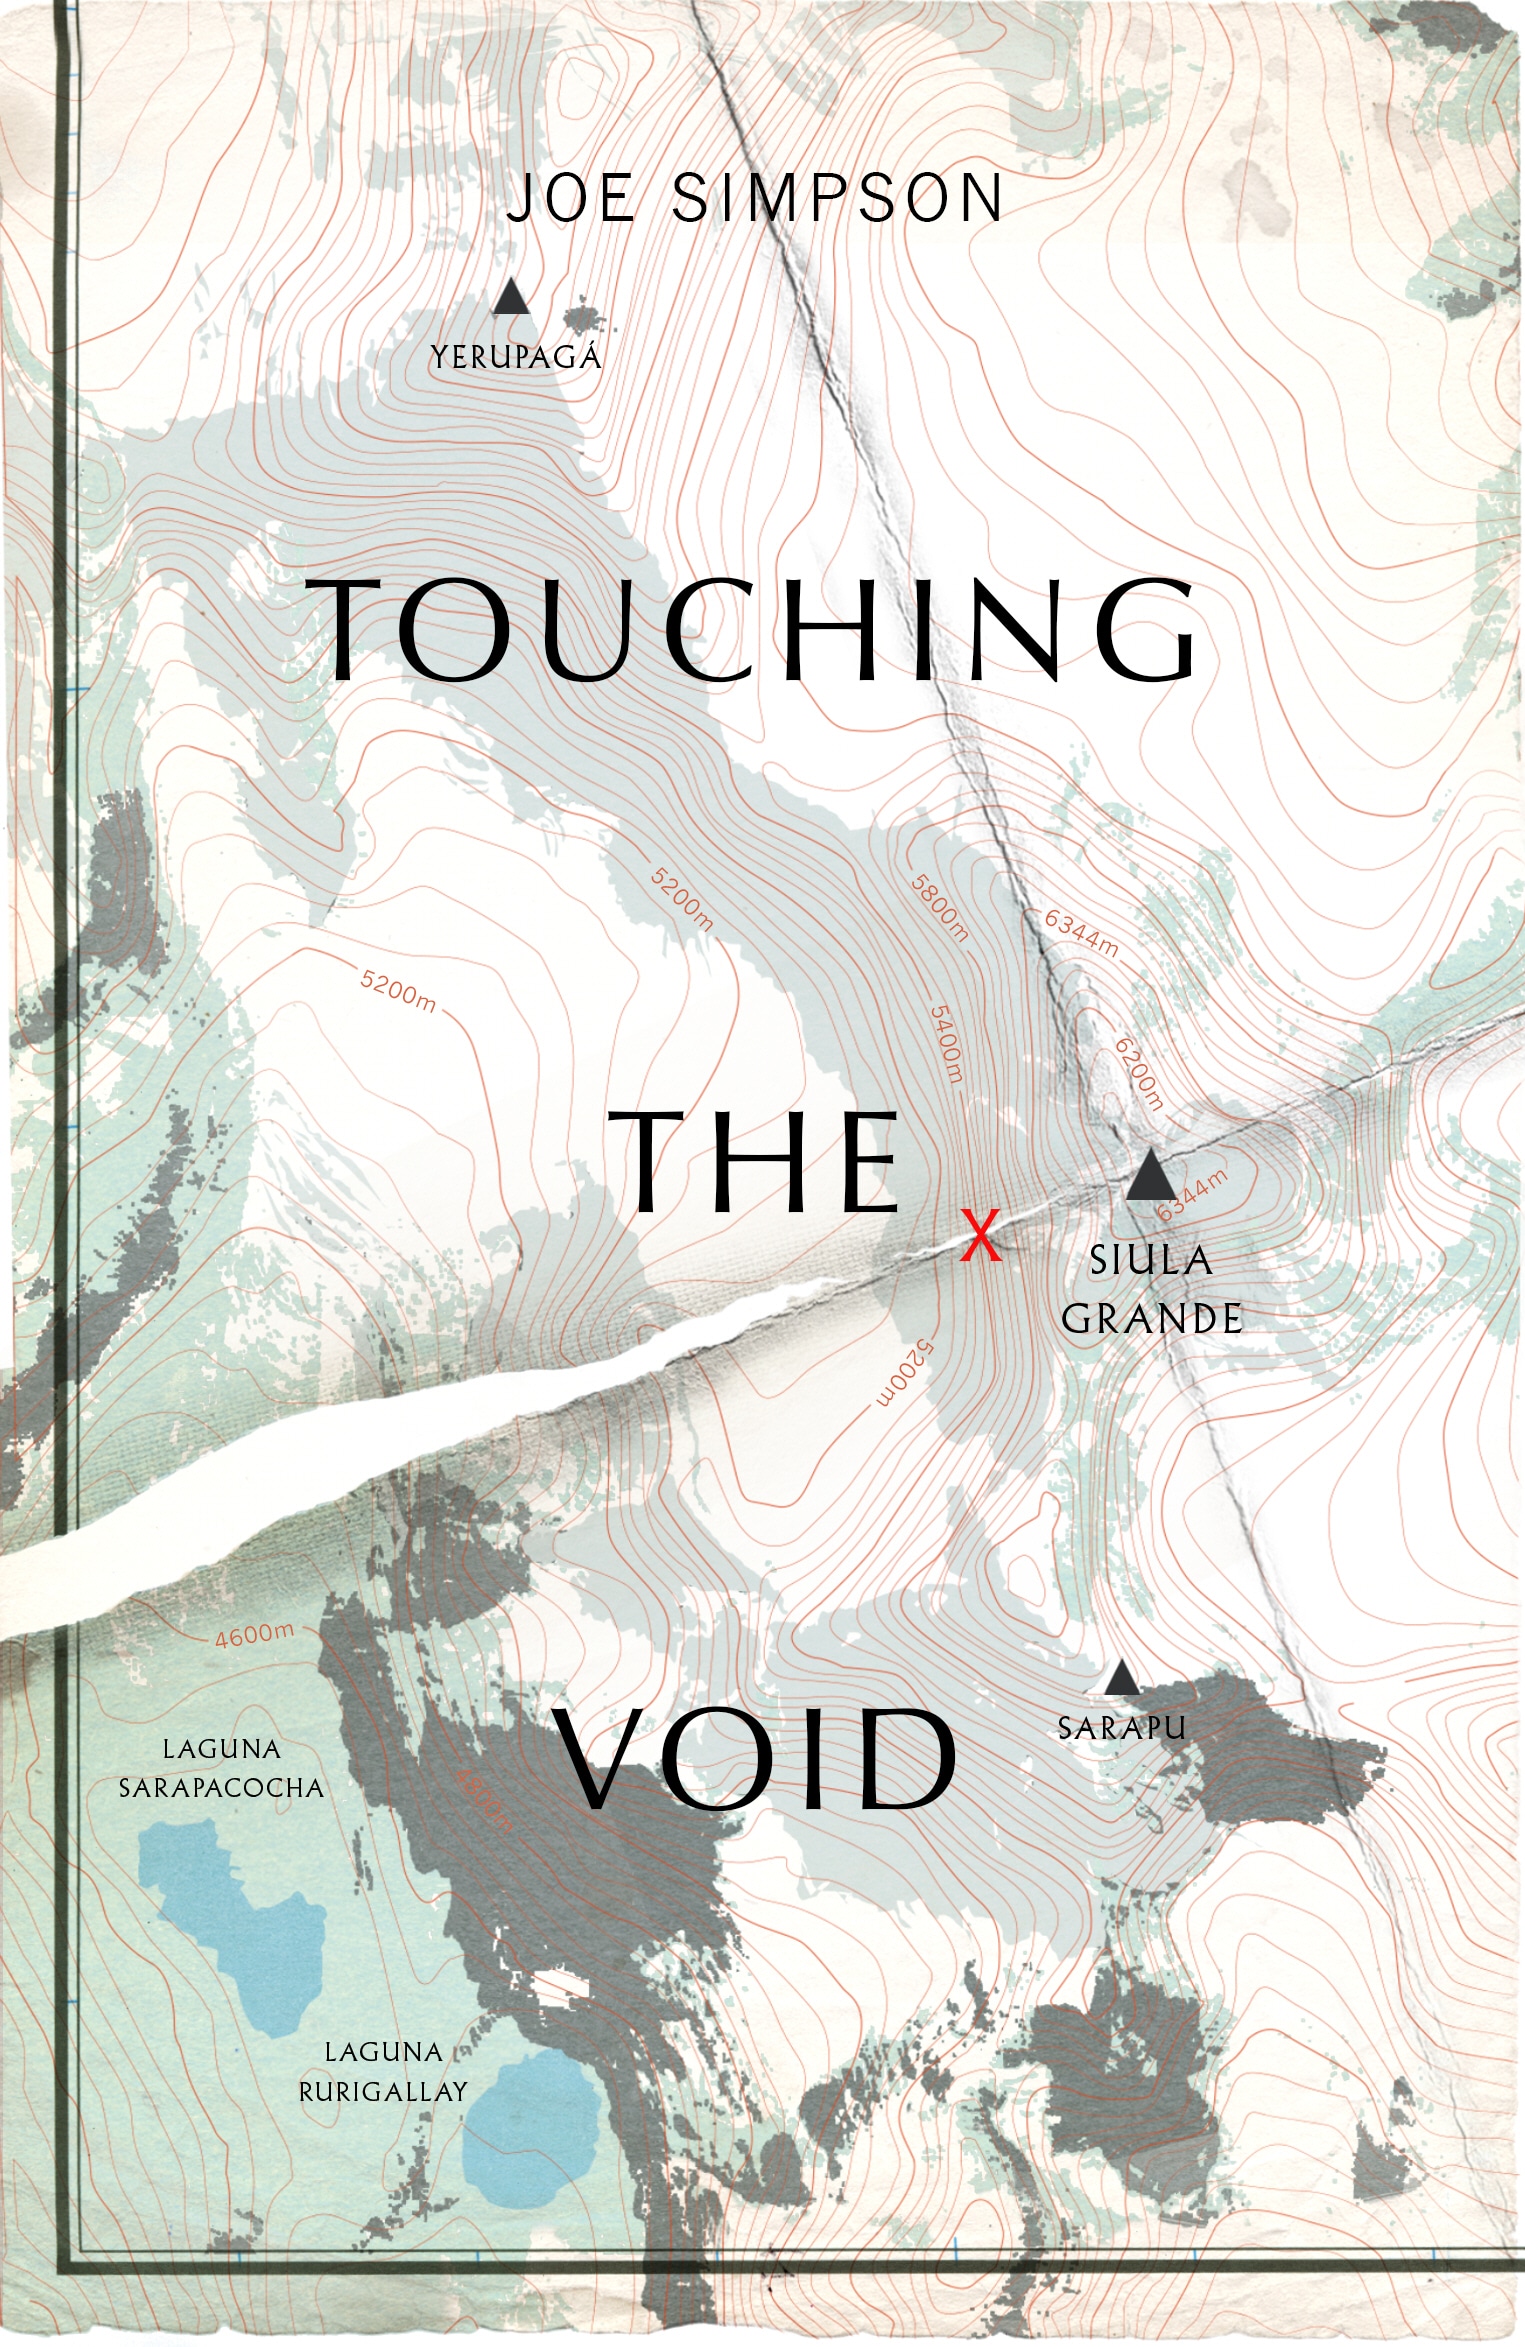 Book “Touching The Void” by Joe Simpson — June 6, 2019